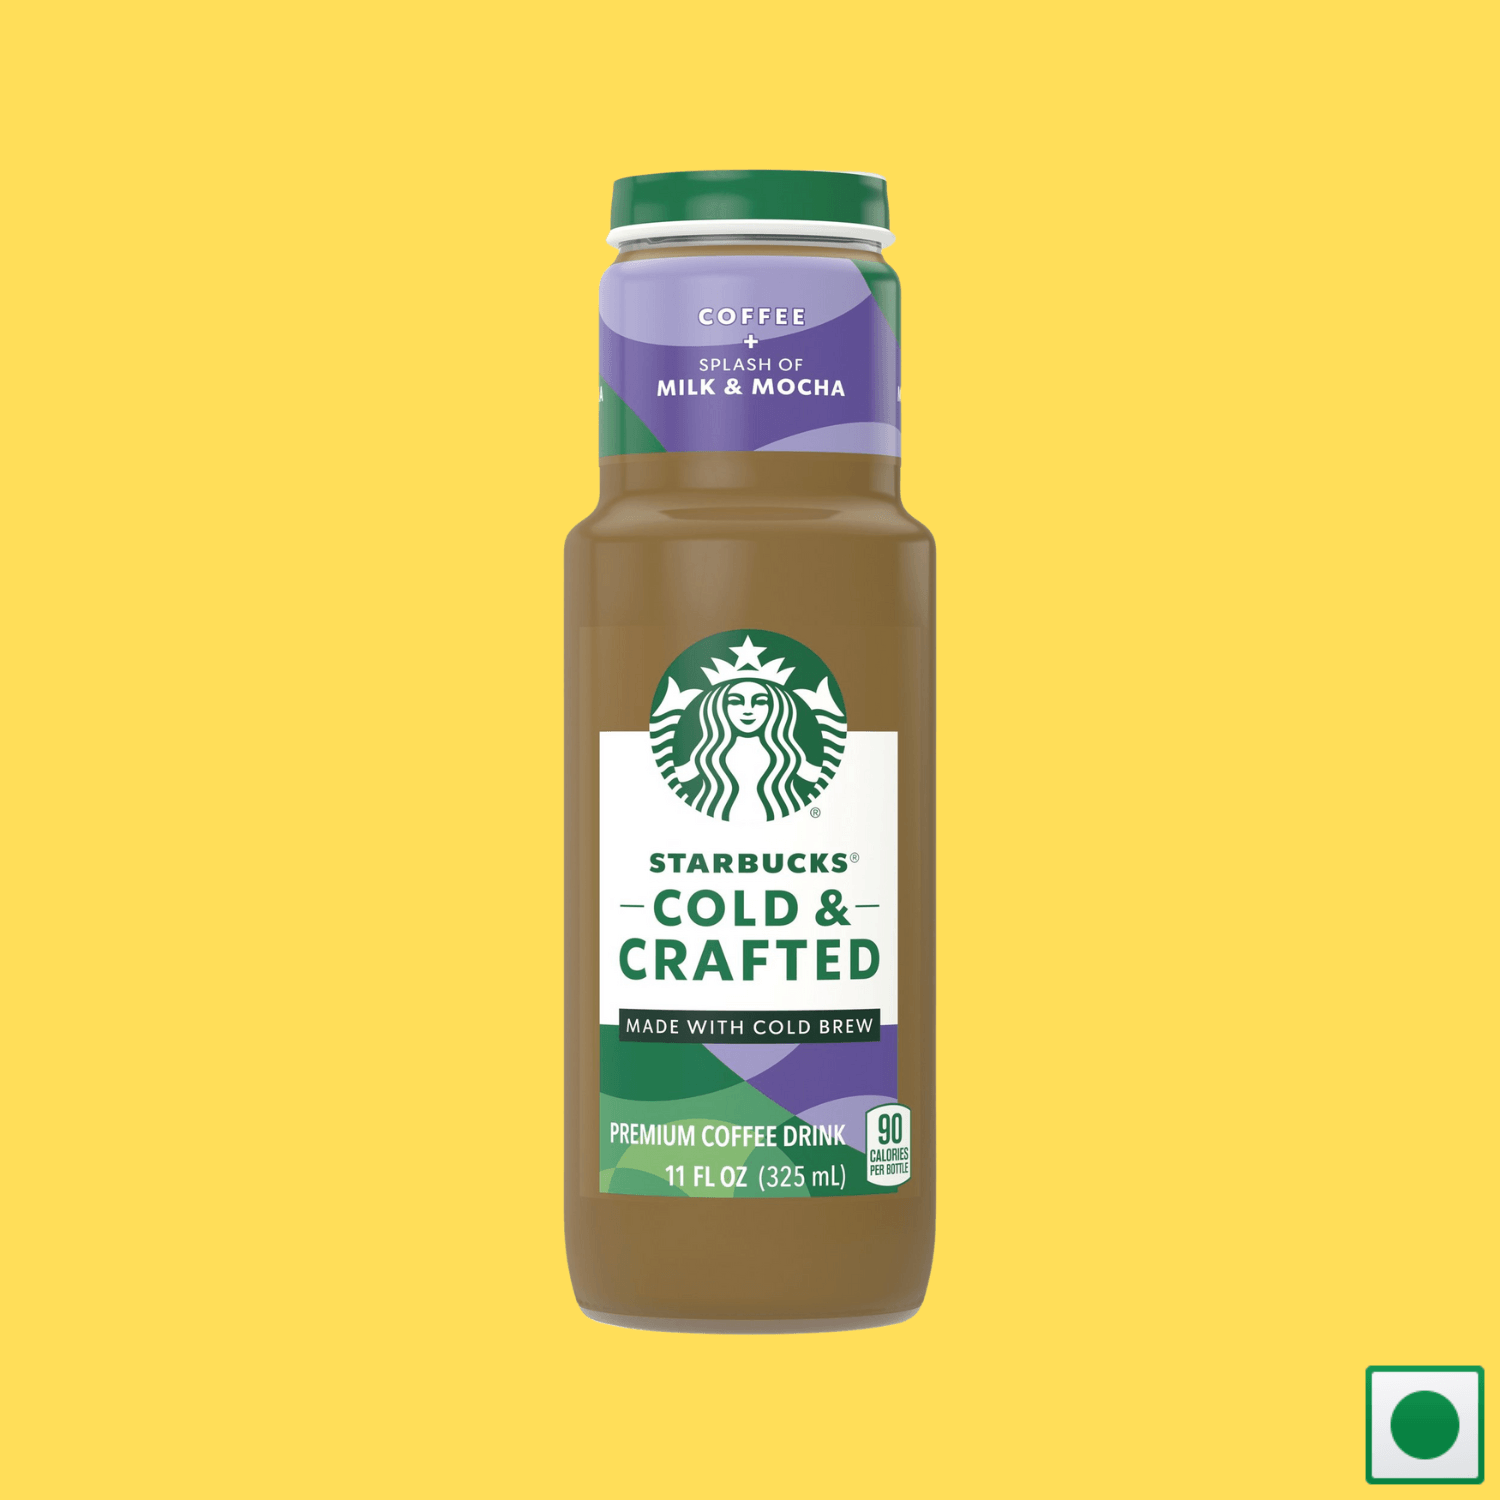 Starbucks Cold & Crafted Coffee + Splash of Milk & Mocha Cold Brew Crafted Coffee, 325ml (Imported) - Super 7 Mart